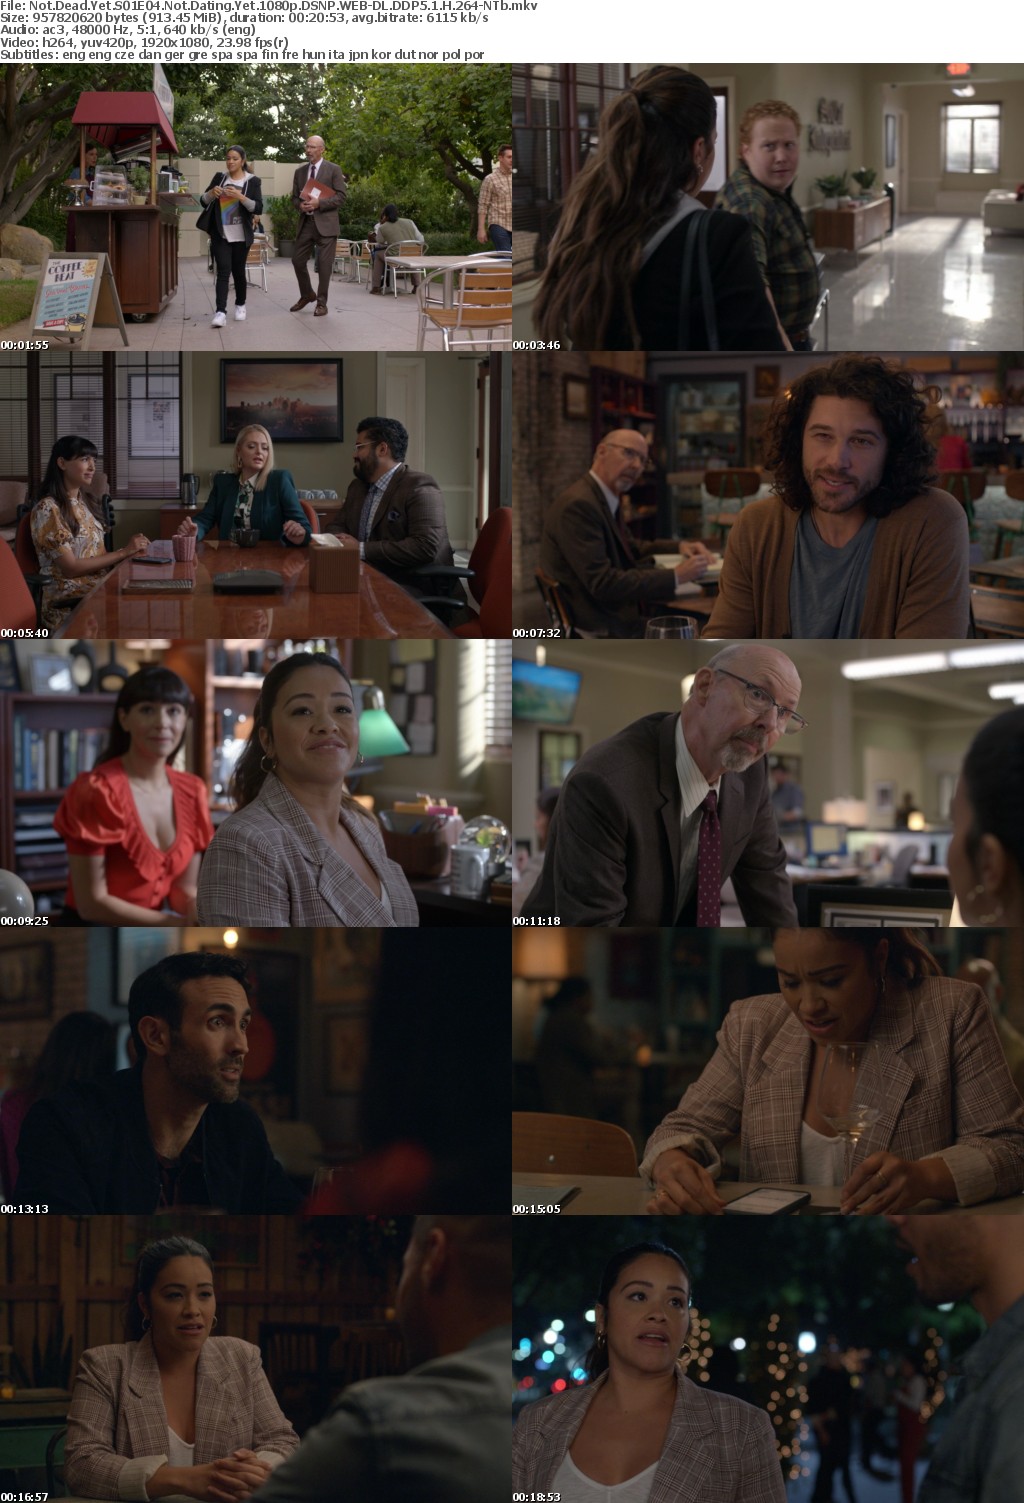 Not Dead Yet S01E04 Not Dating Yet 1080p DSNP WEBRip DDP5 1 x264-NTb